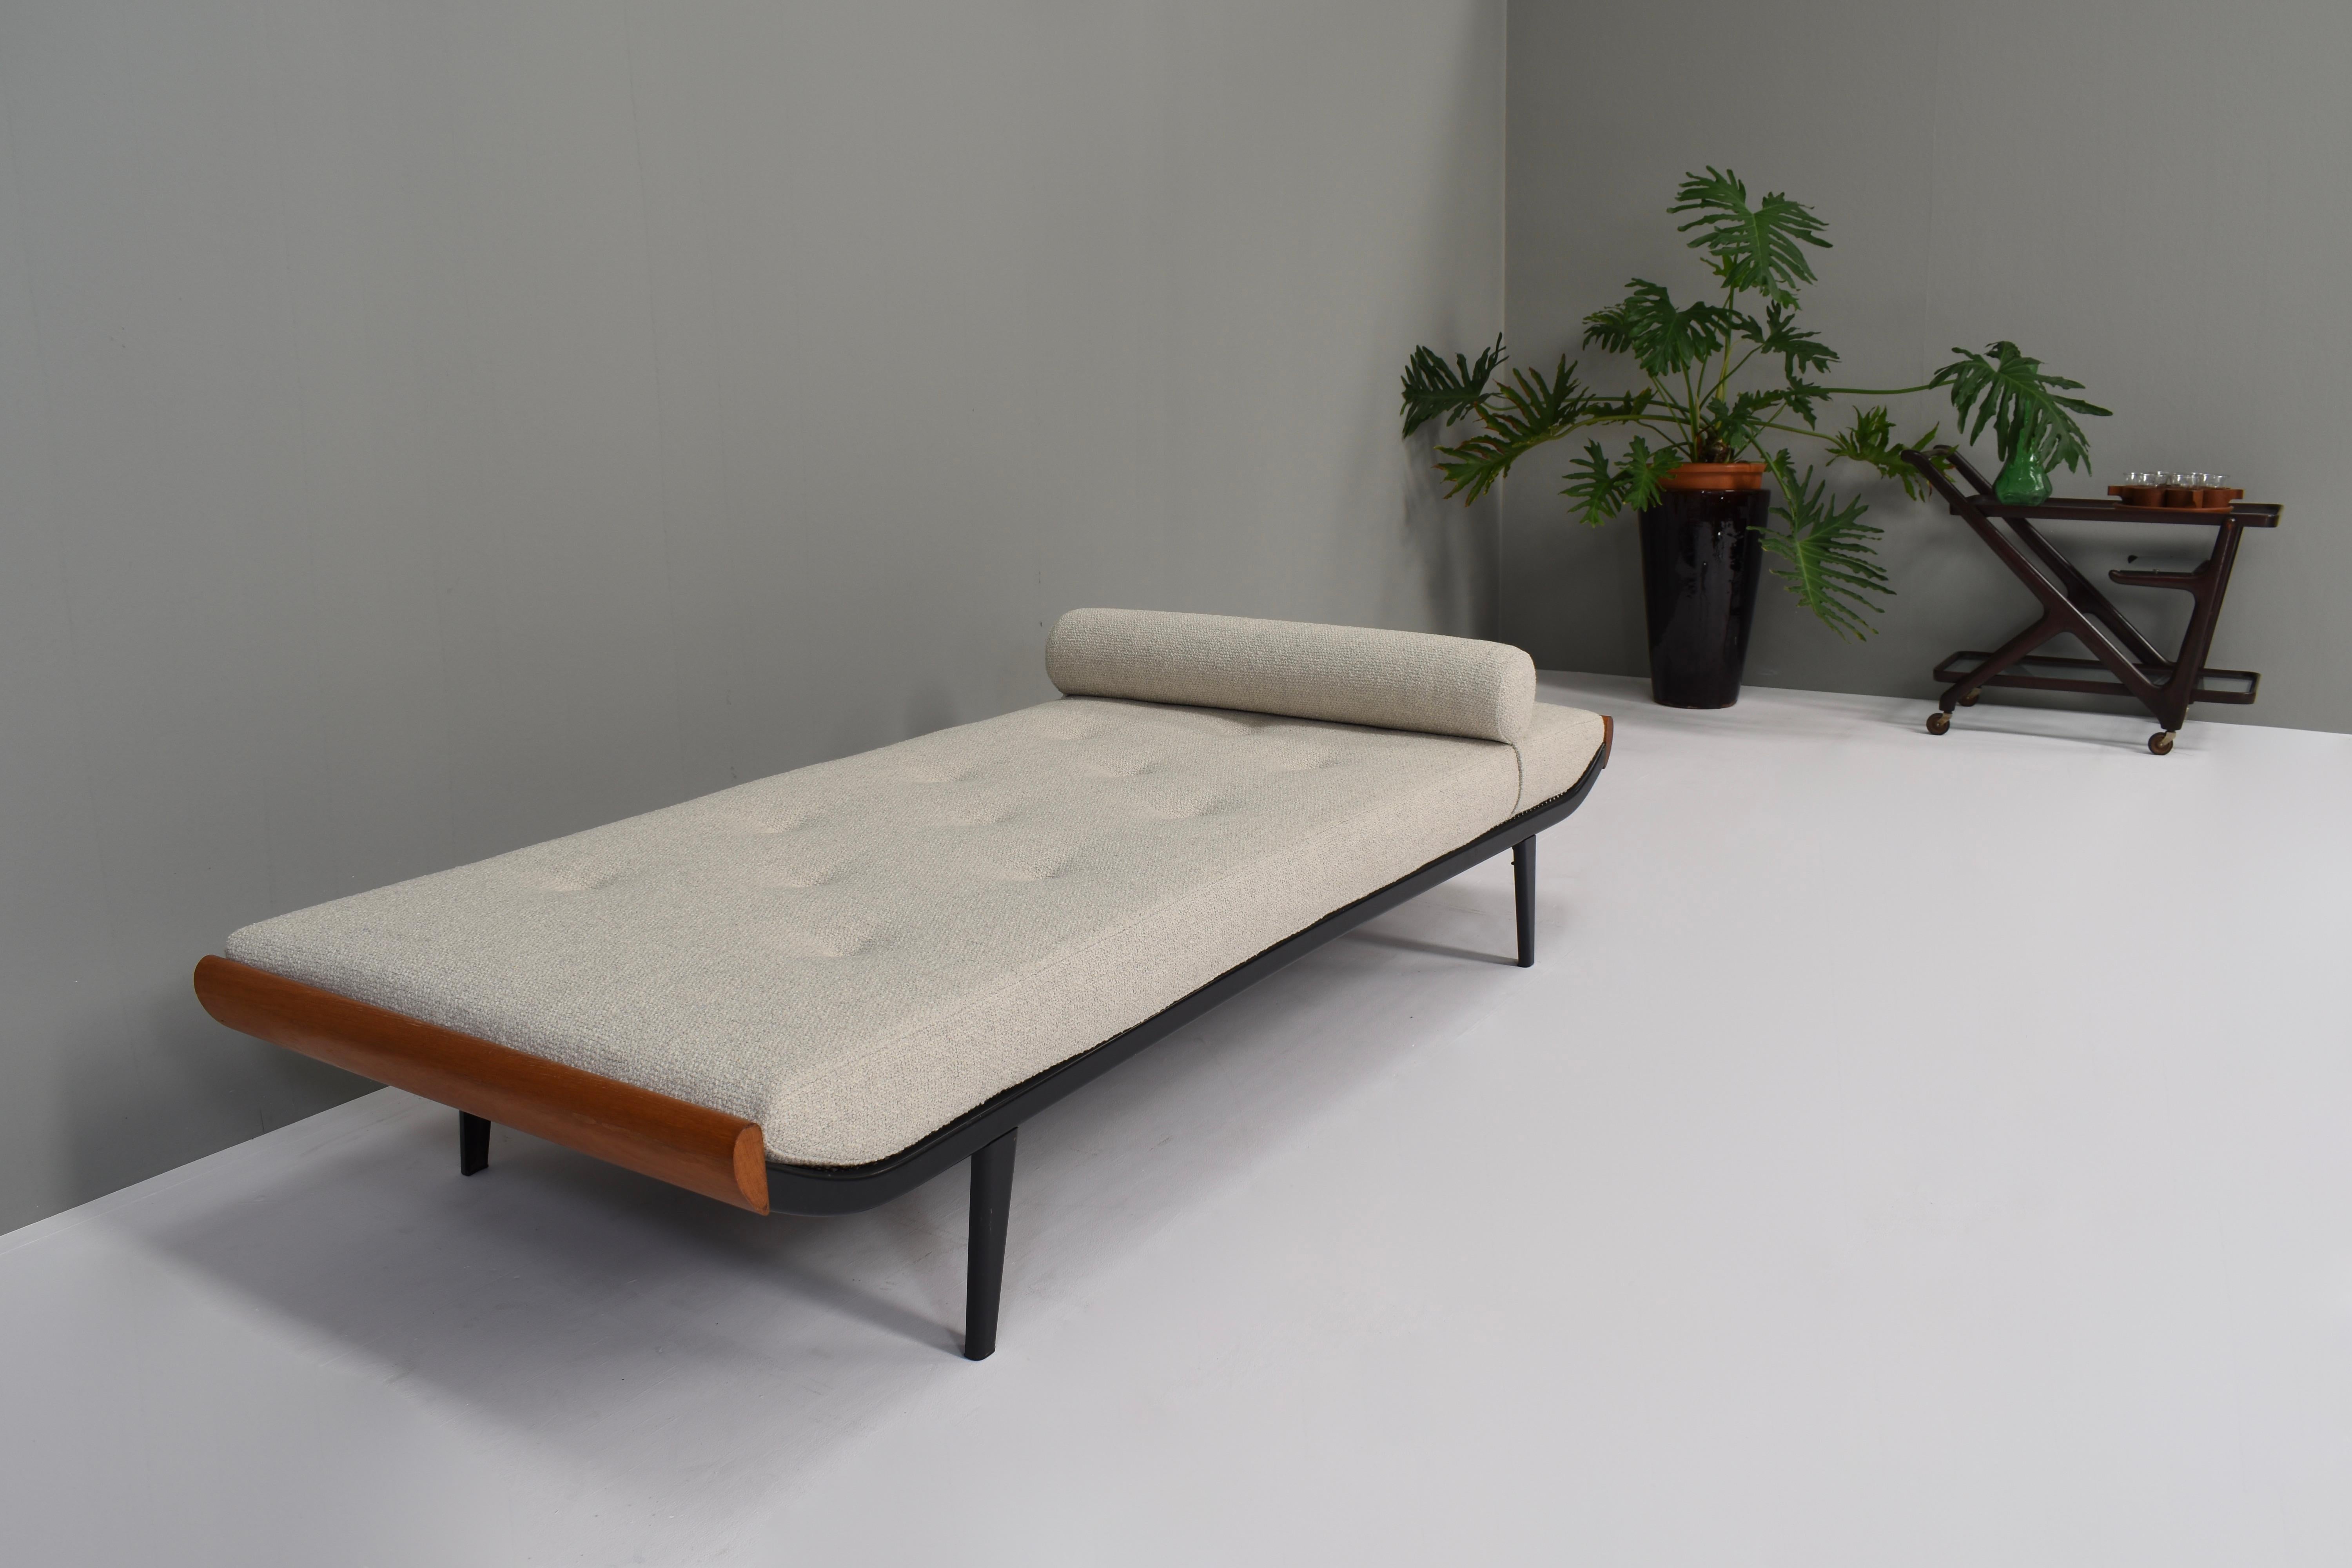 Mid-Century Modern Cleopatra Daybed Designed by Cordemeijer for Auping, Netherlands, 1954